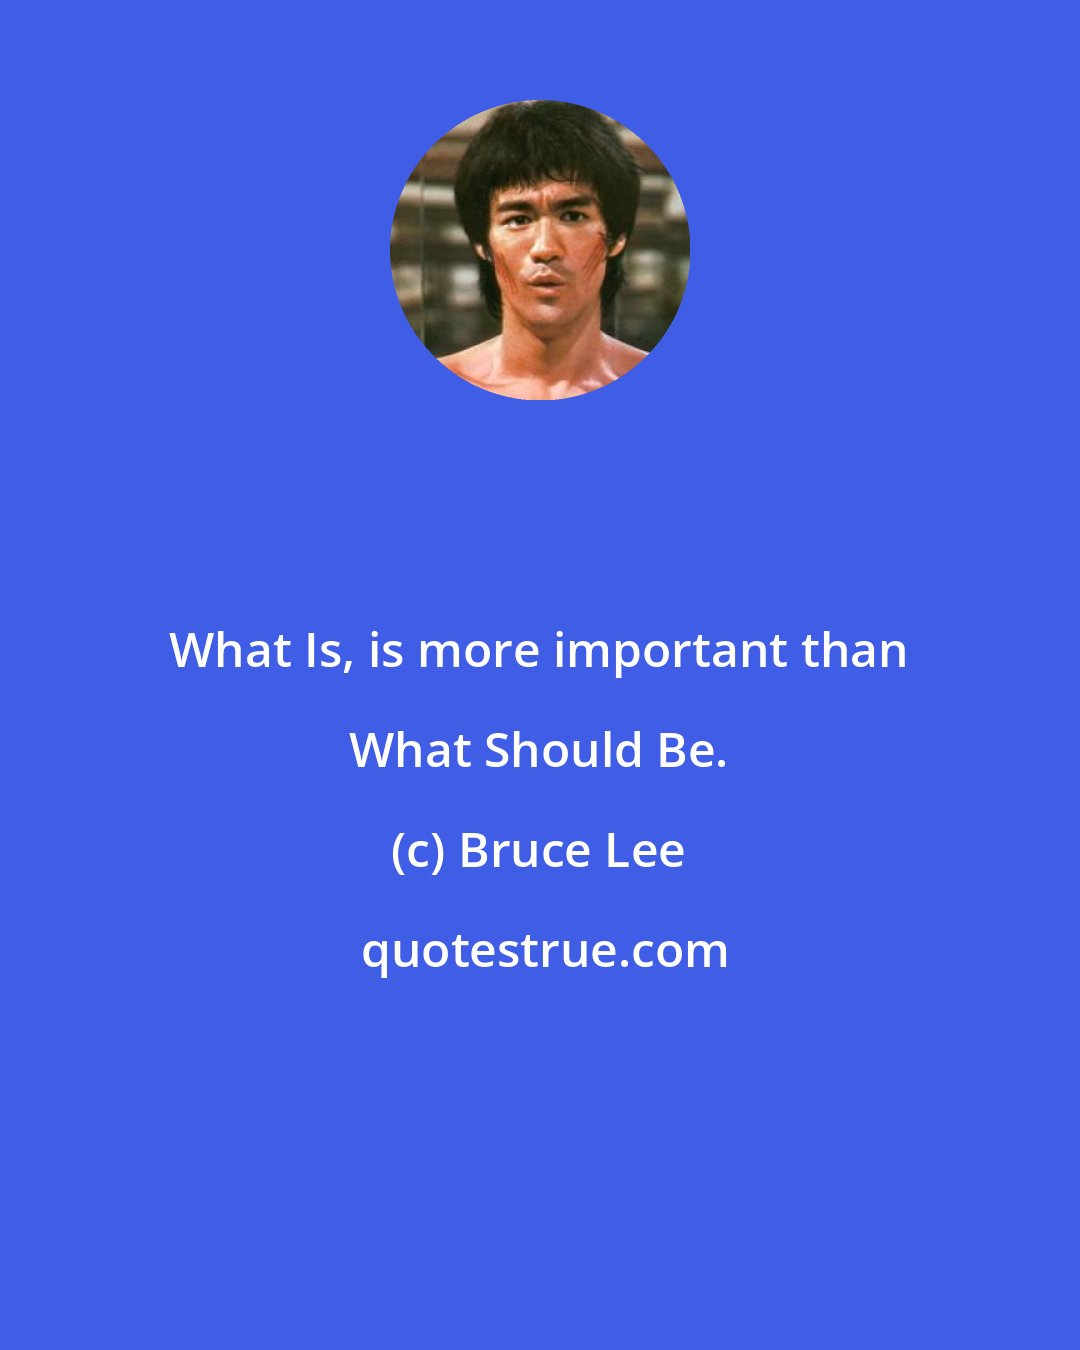 Bruce Lee: What Is, is more important than What Should Be.